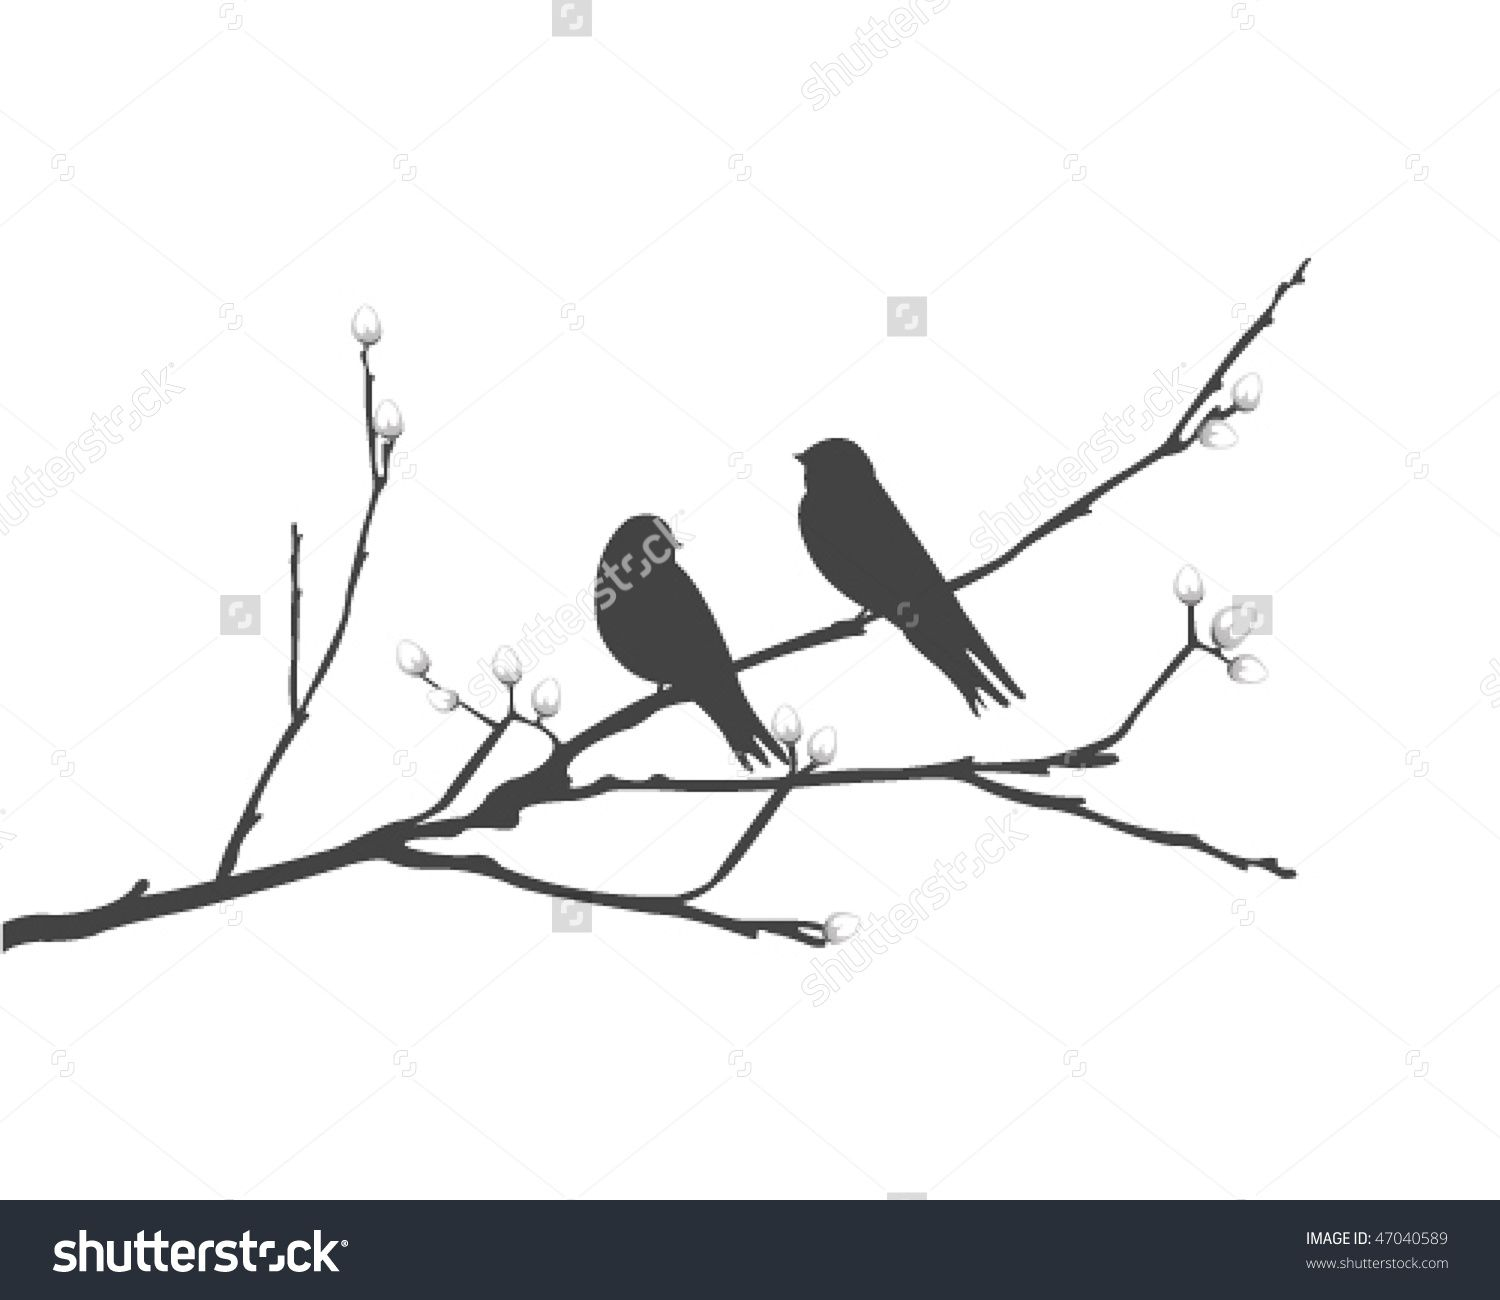 Image Result For Silhouette Birds On Branch Bird Tattoo Ideas pertaining to measurements 1500 X 1300